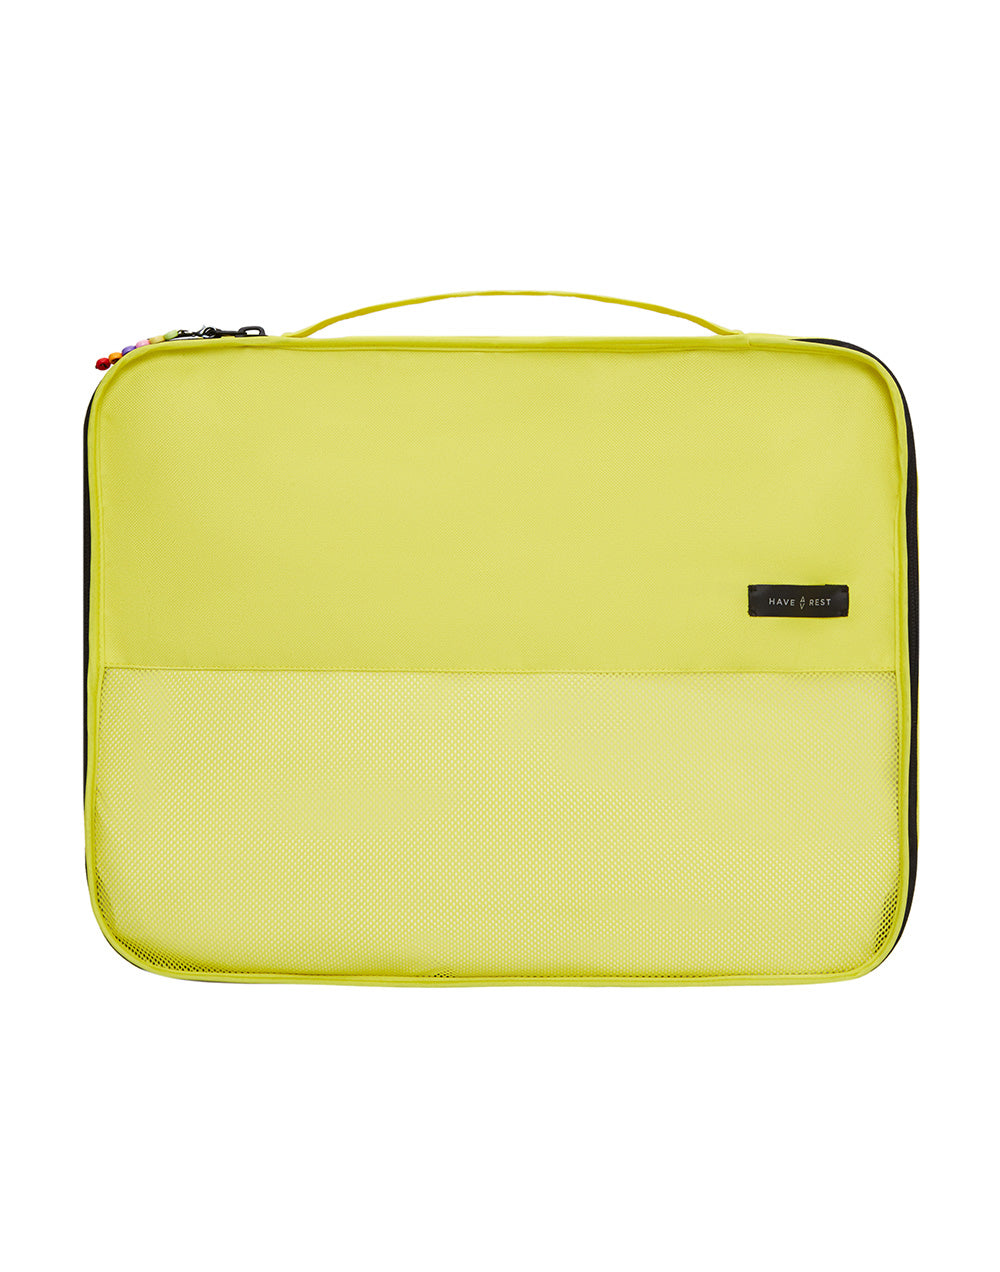 Set Of Organizers For Clothes Eco Travel Sunny Lemon HAVE A REST